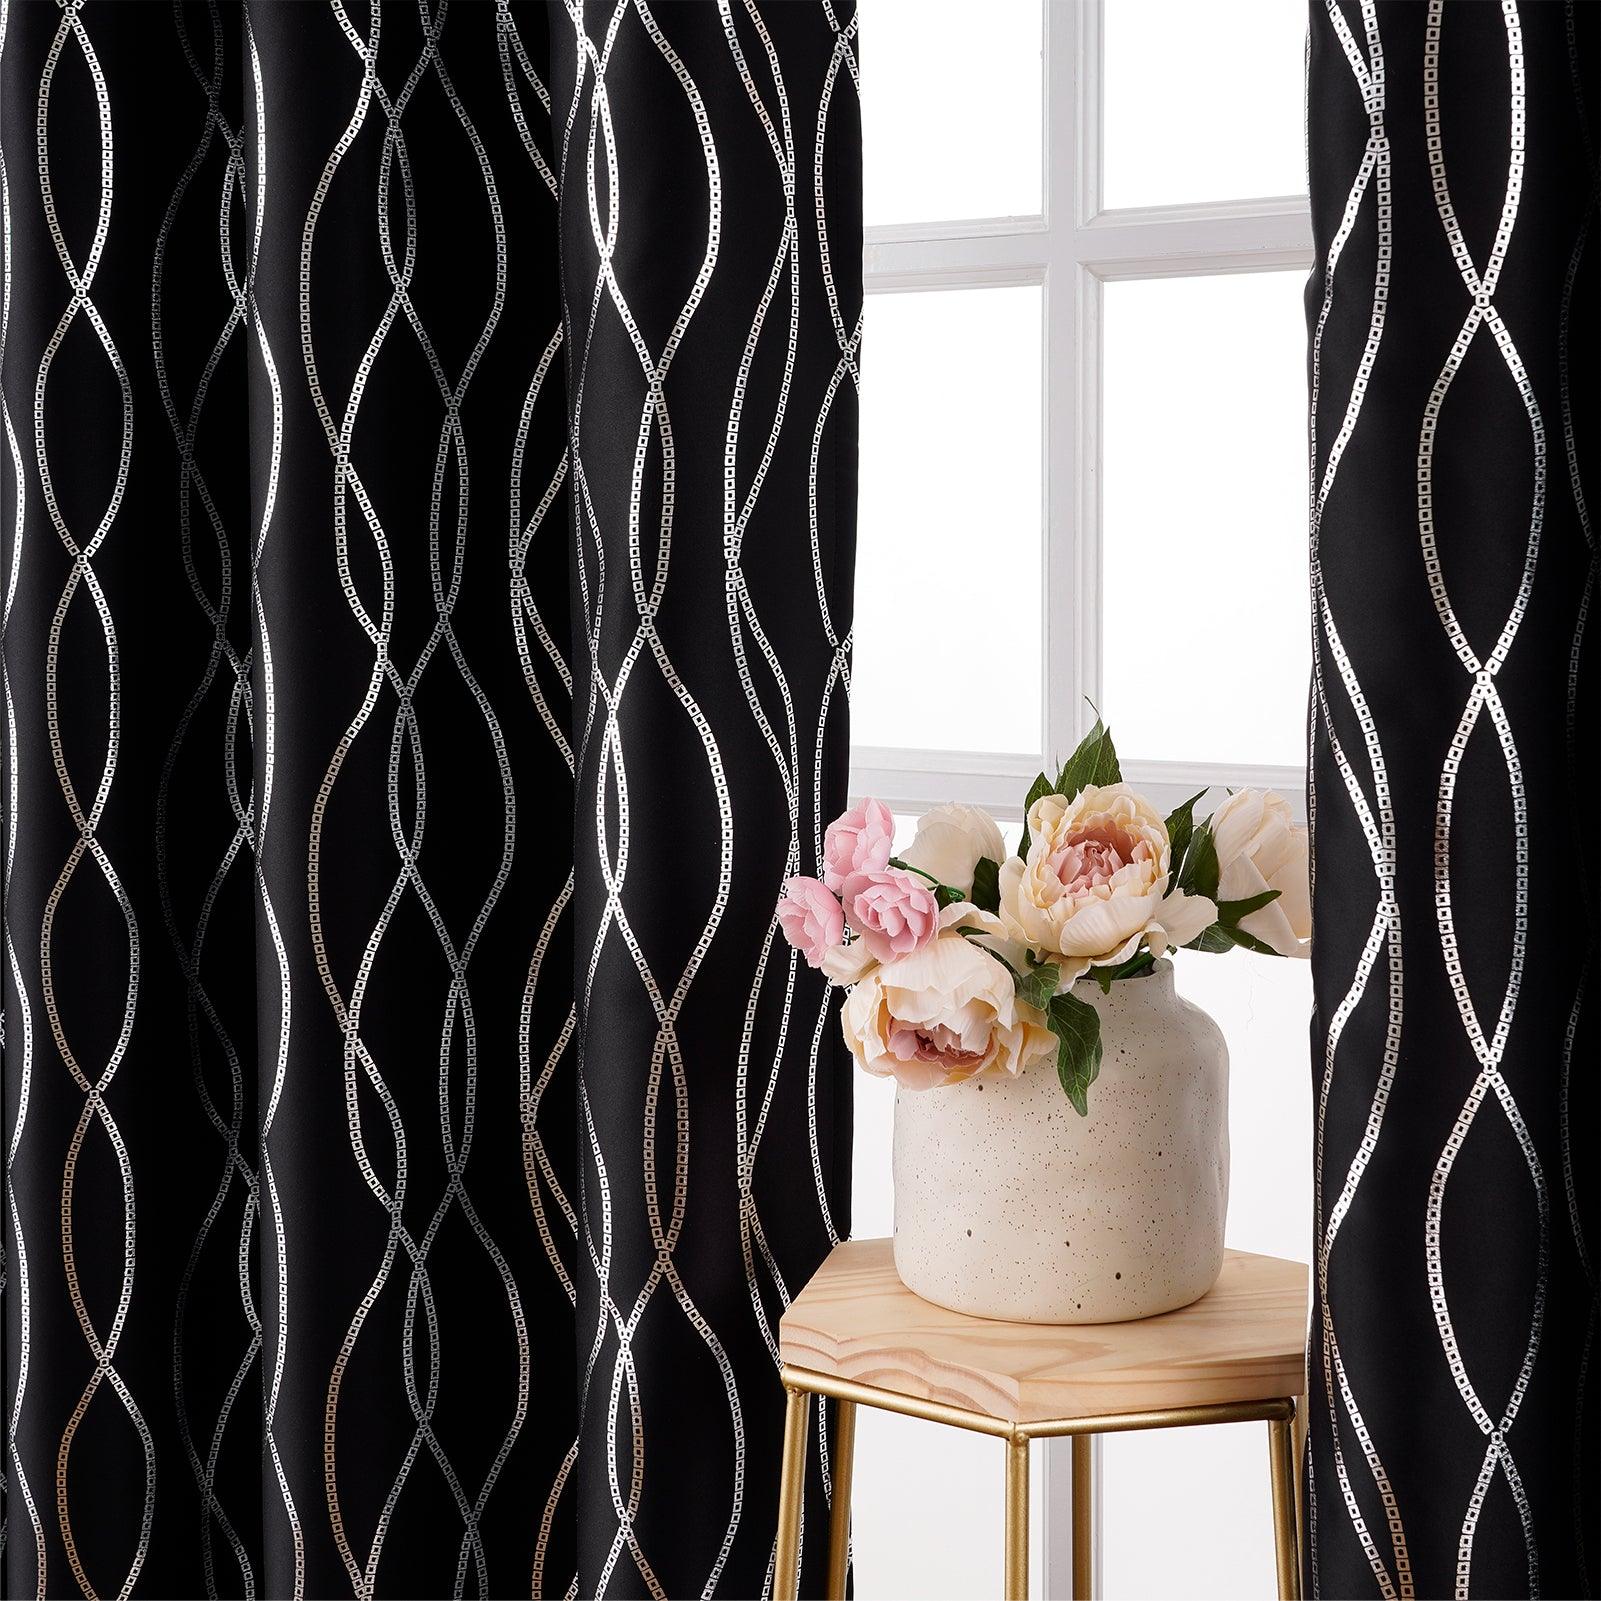 Topfinel Pongee Printed 100% Blackout Curtains for Bedroom and Living Room，Thermal Insulating Drapes - Topfinel